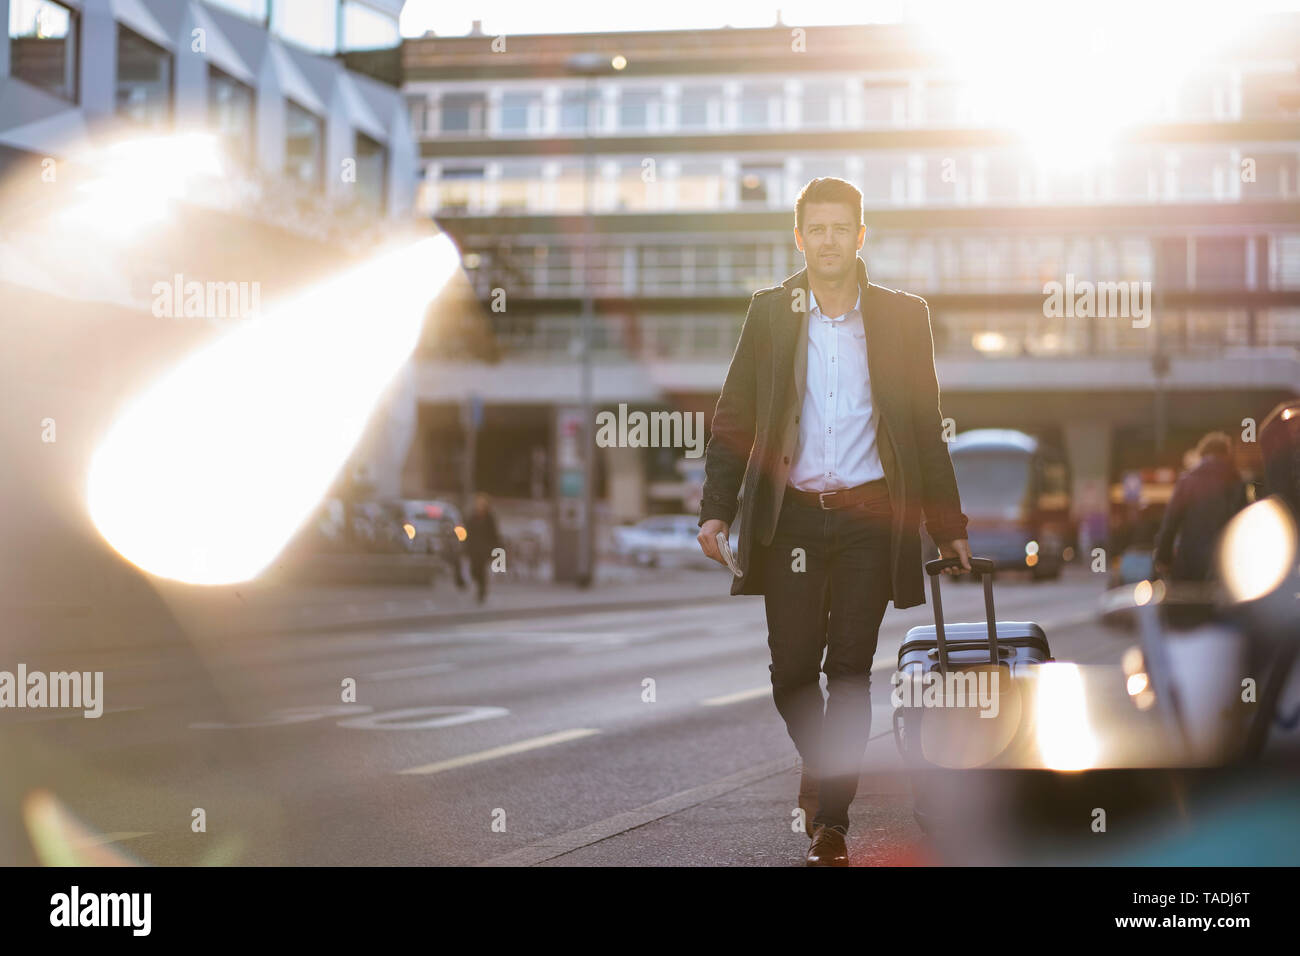 Businessman with suitcase on the move in the city Stock Photo